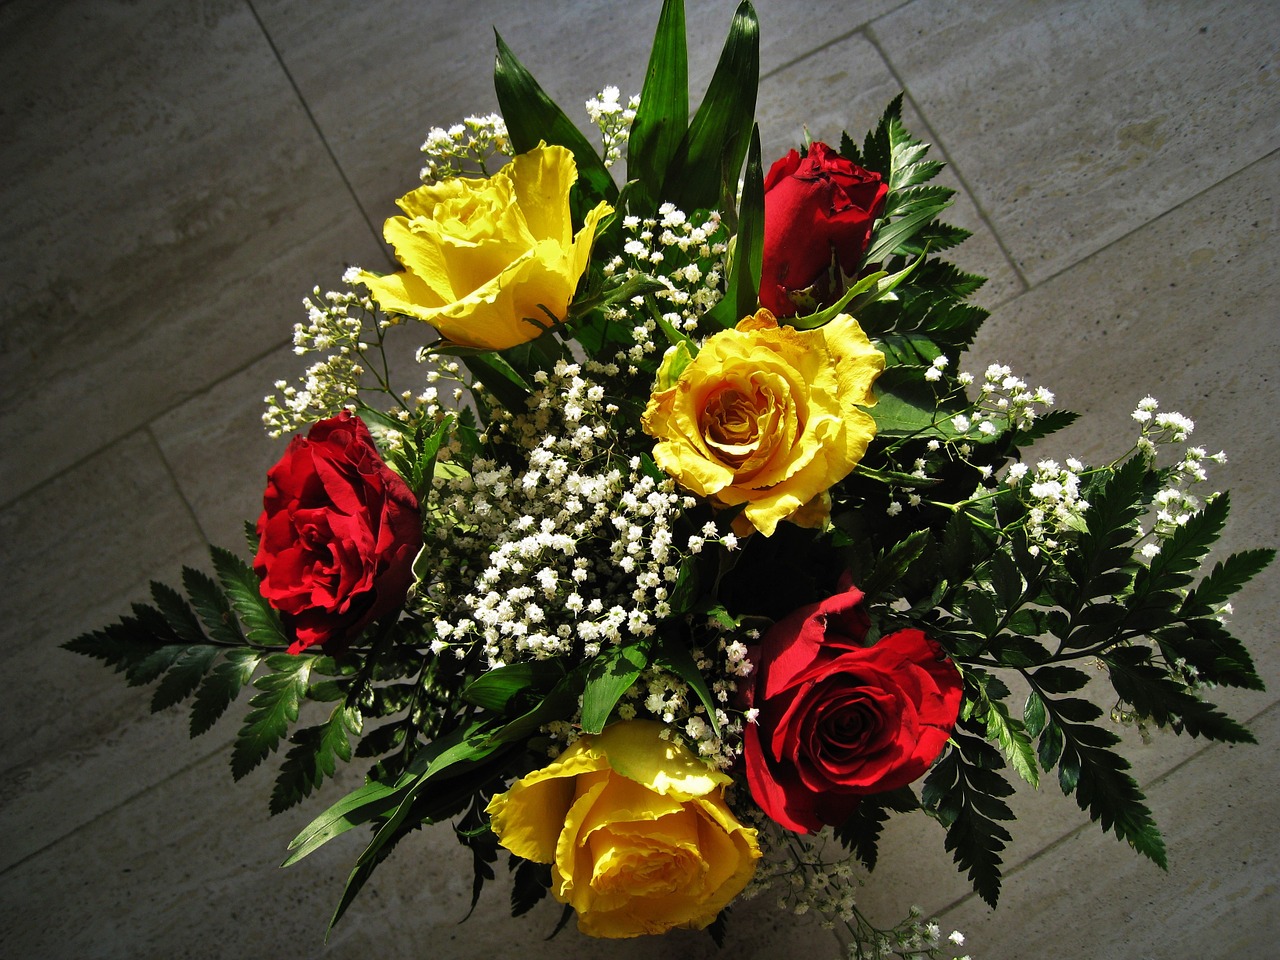 bouquet of roses red and yellow roses he loved flowers free photo